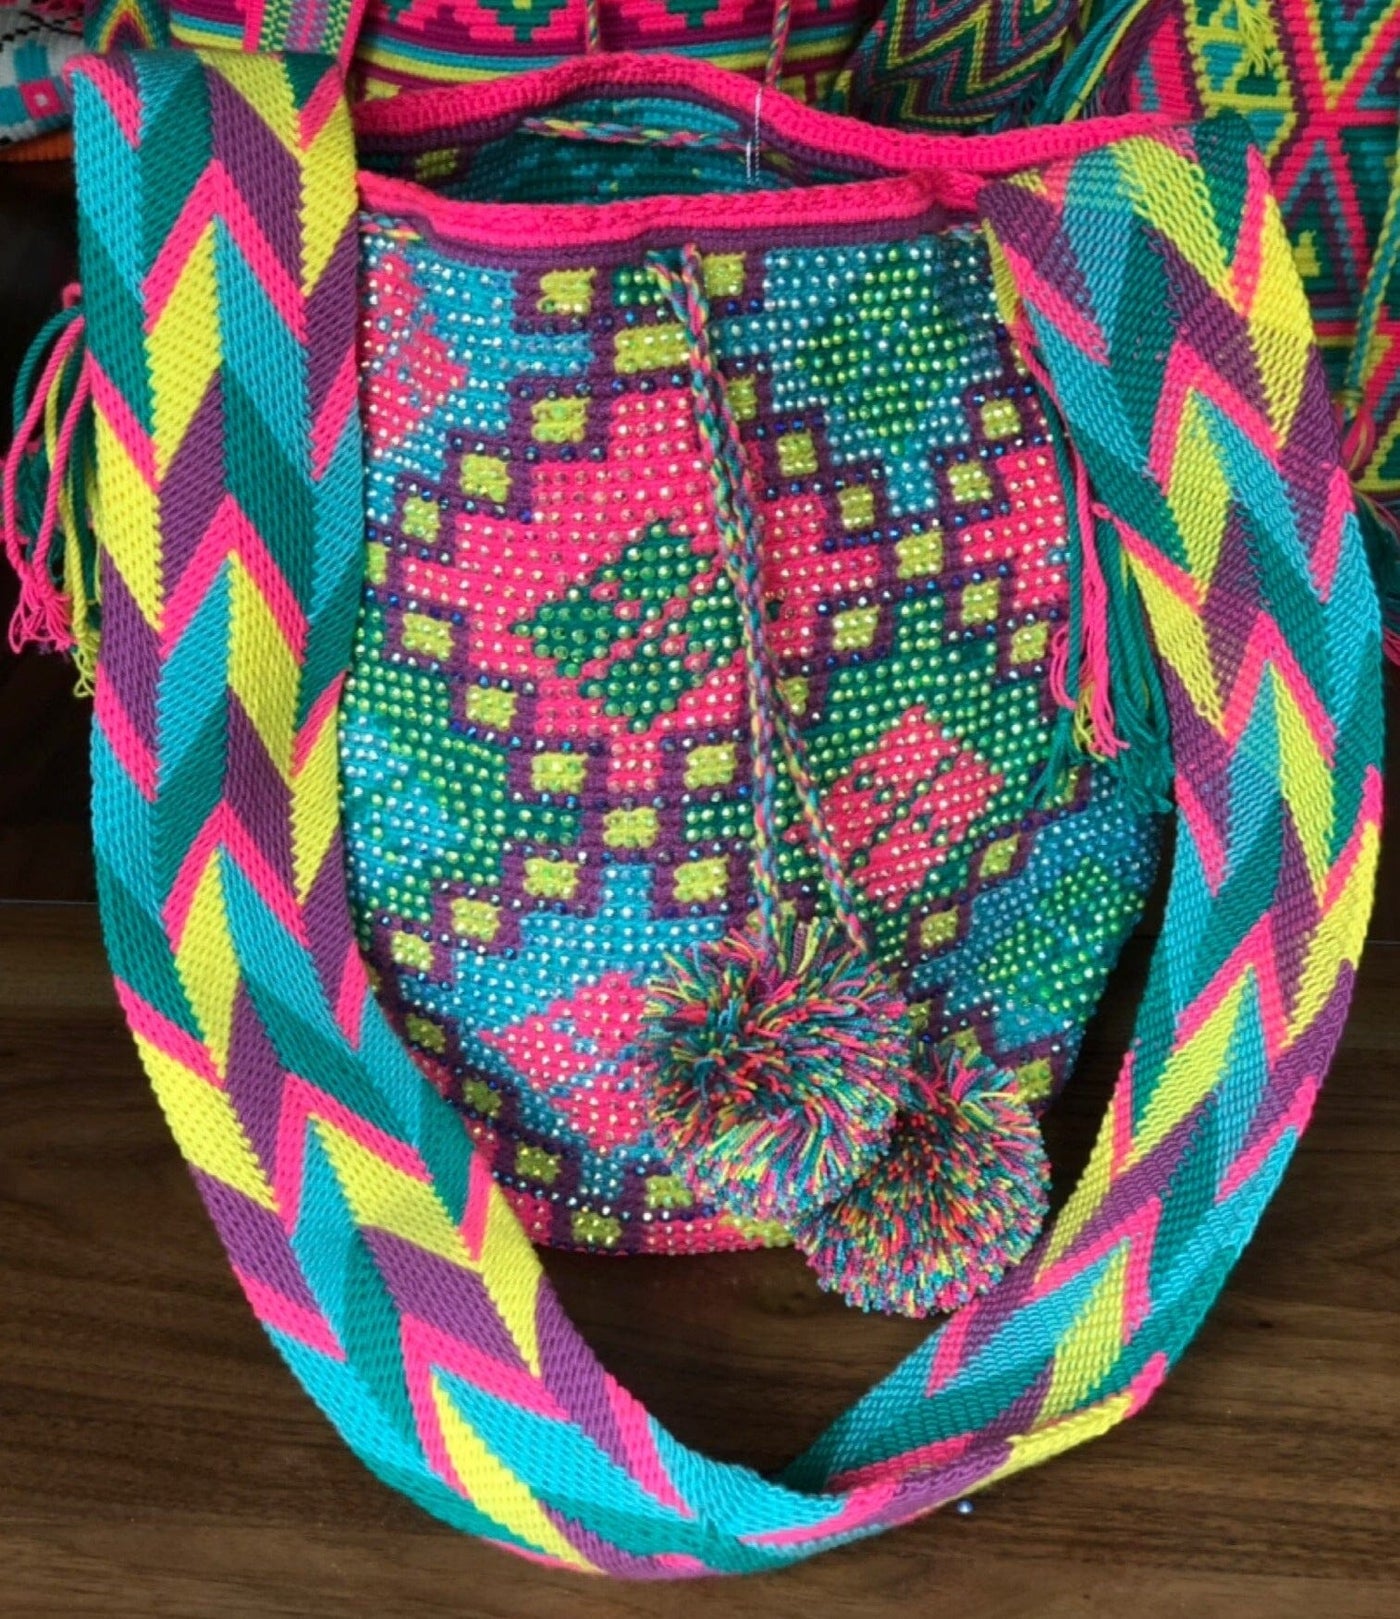 Crossbody Summer Bag with Crystals | Hot Pink-Yellow Bohemian Bag for summer | Colorful 4U